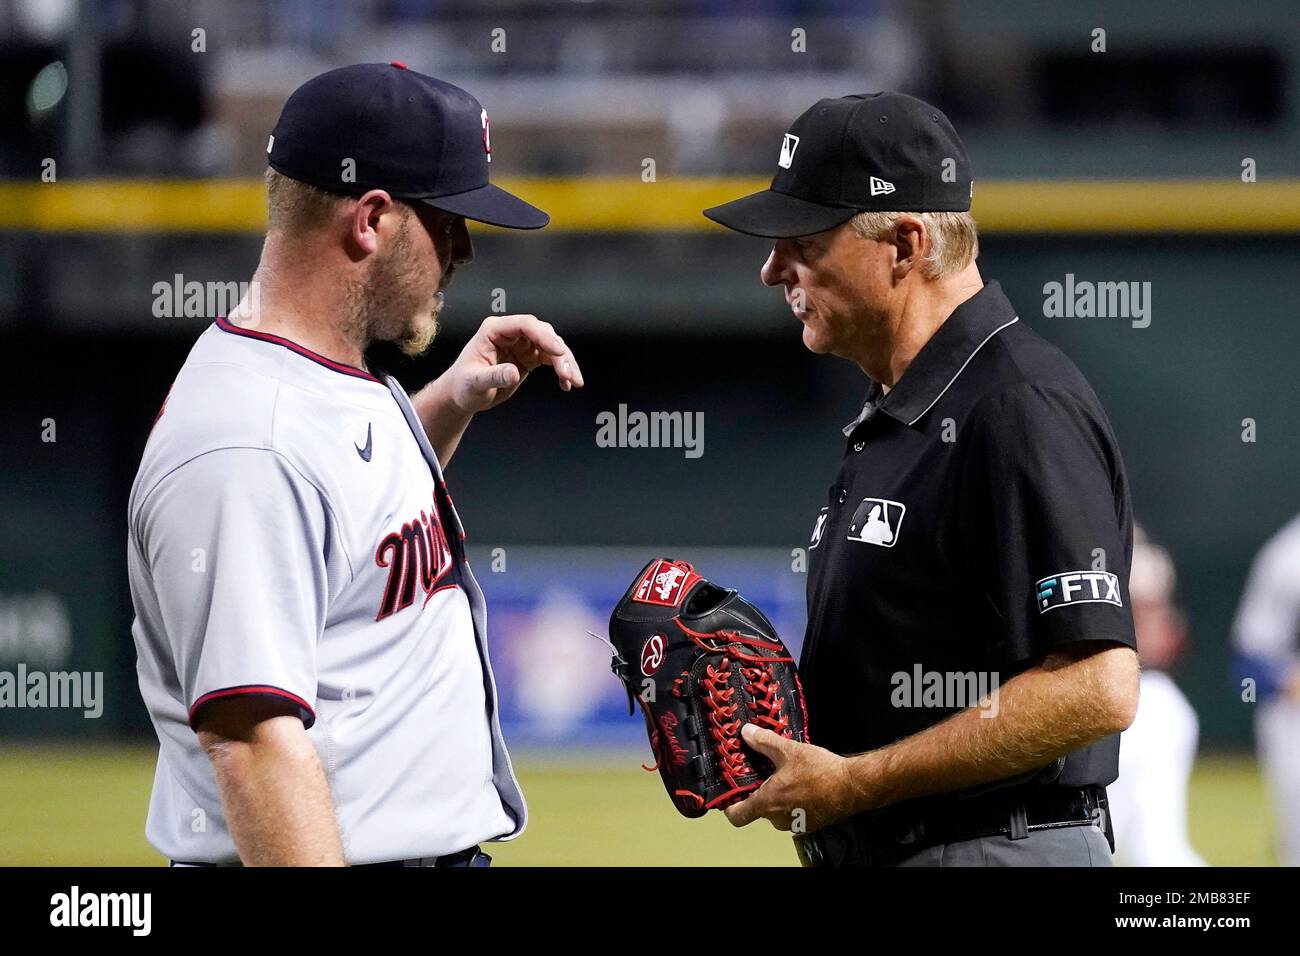 Minnesota Twins starting pitcher Dylan Bundy, left, has his glove examined  by umpire Ed Hickox during the first inning of the team's baseball game  against the Arizona Diamondbacks on Saturday, June 18,